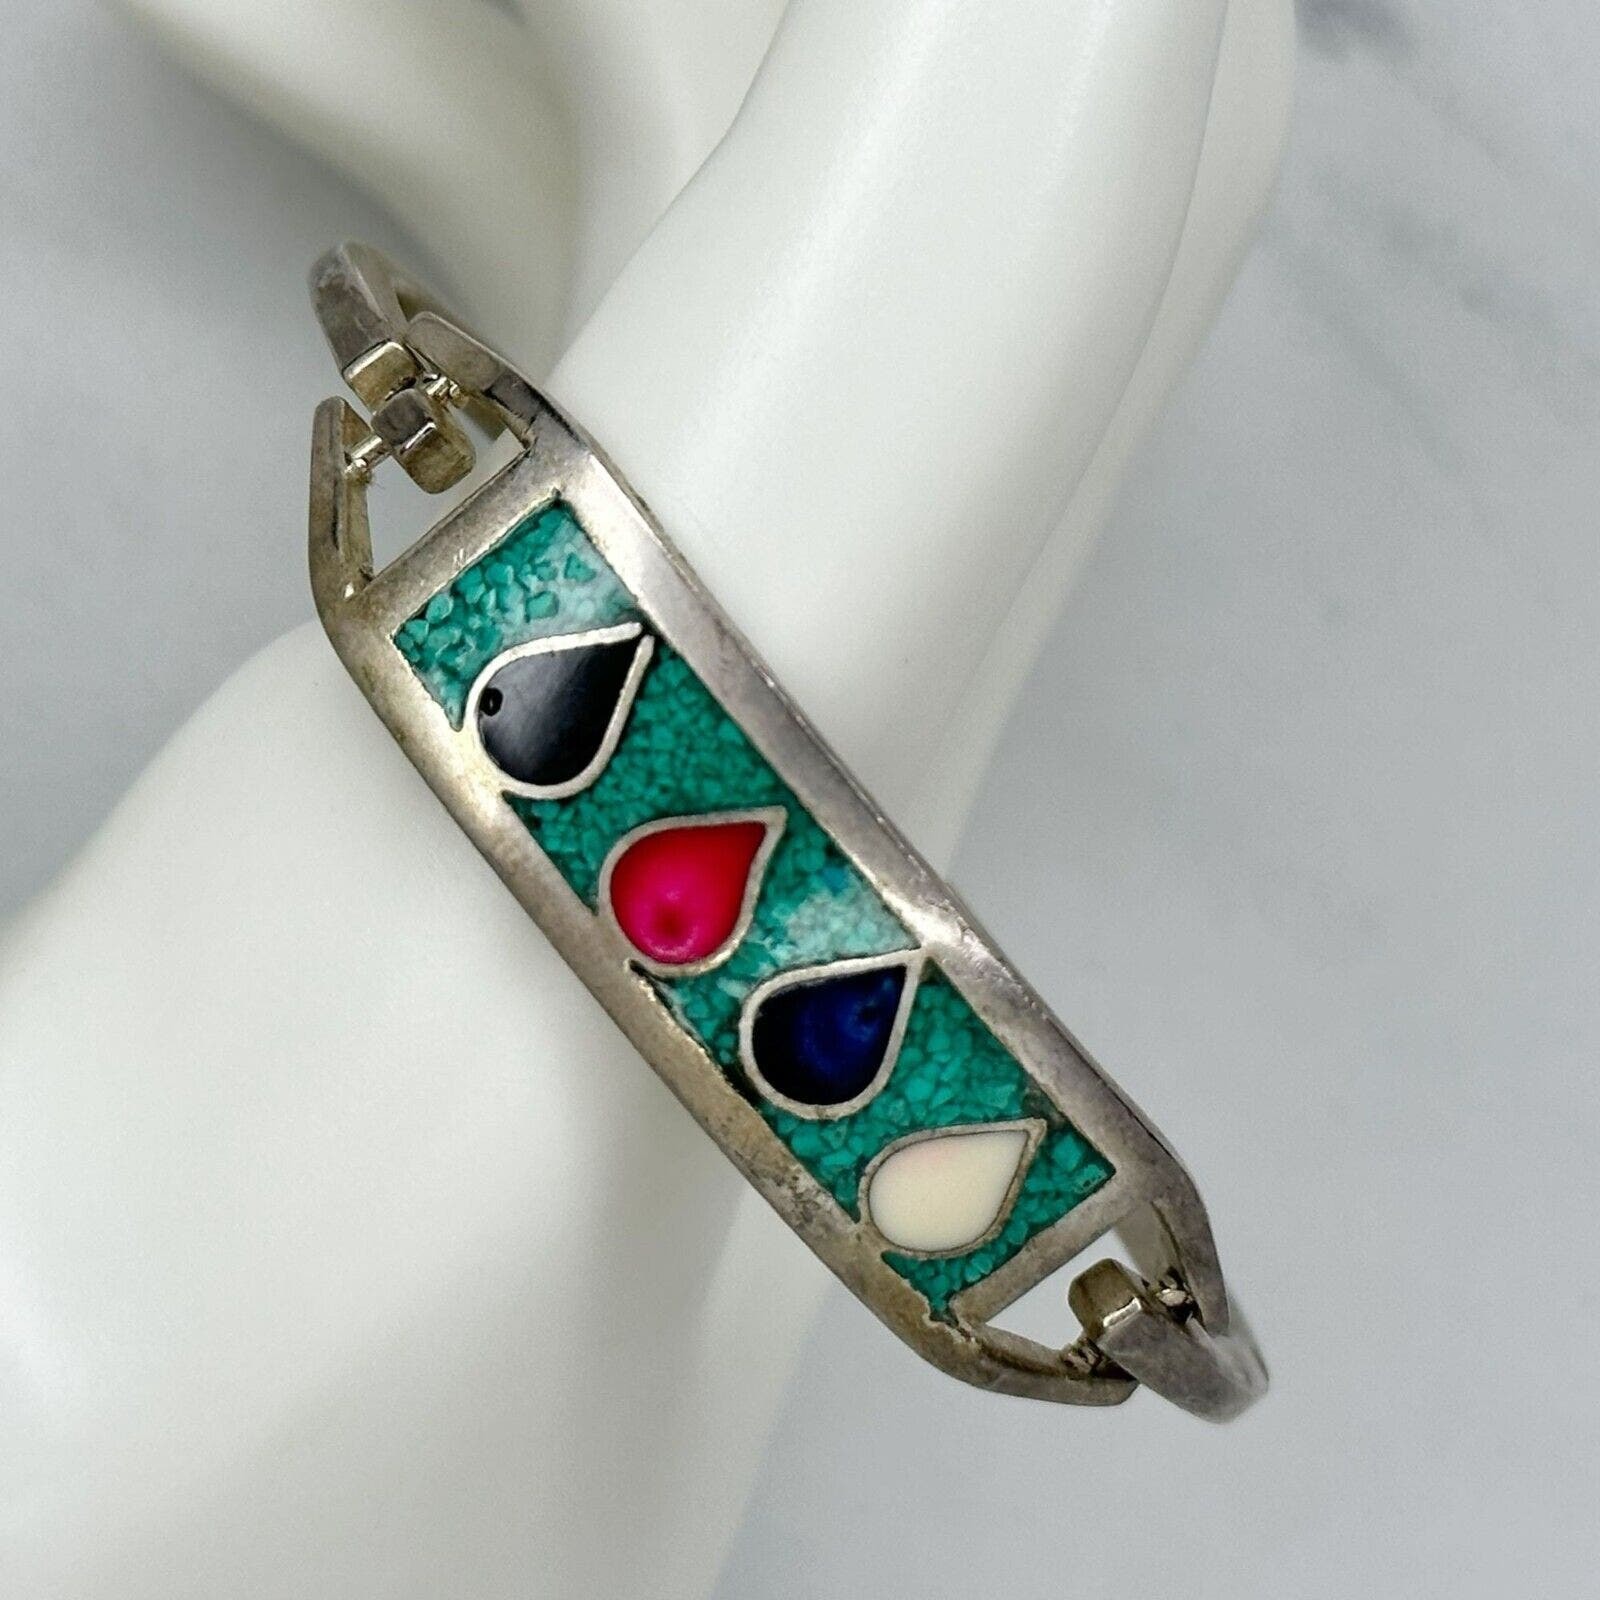 Primary image for Vintage Mexico Silver Tone Turquoise Chip Inlay Hinge Bangle Child's Bracelet